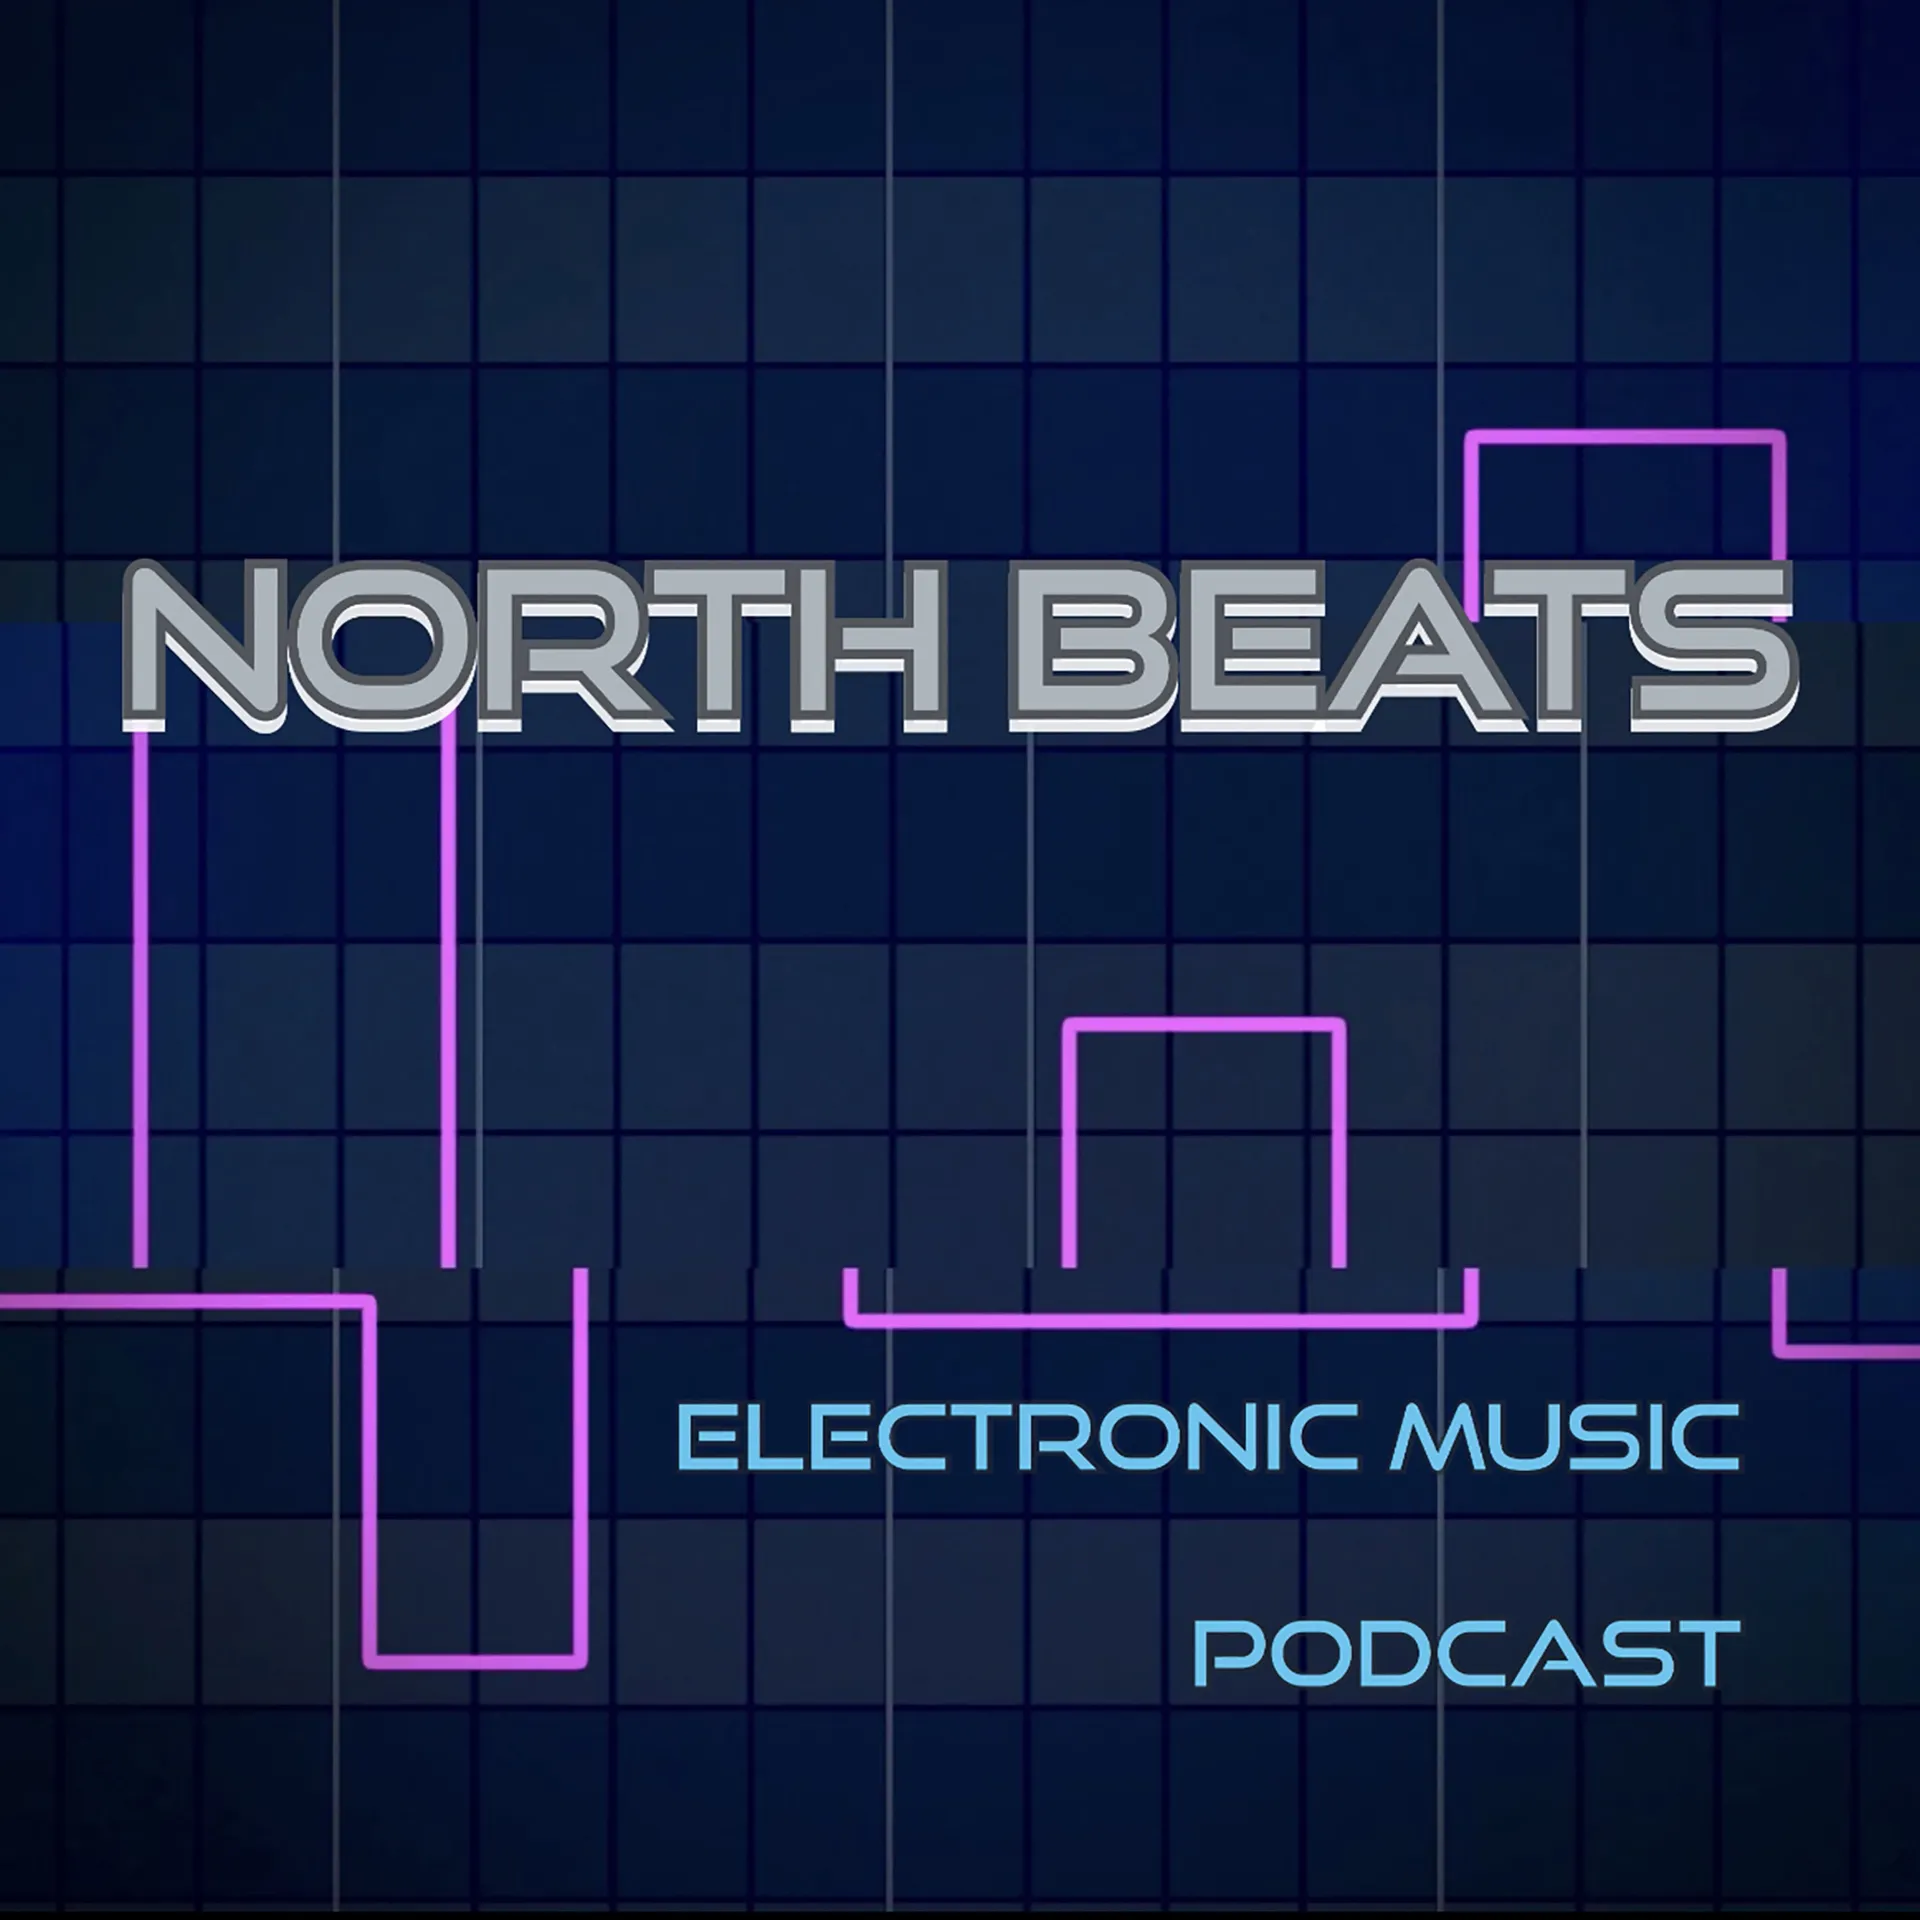 Mark Lentczner interview on North Beats podcast